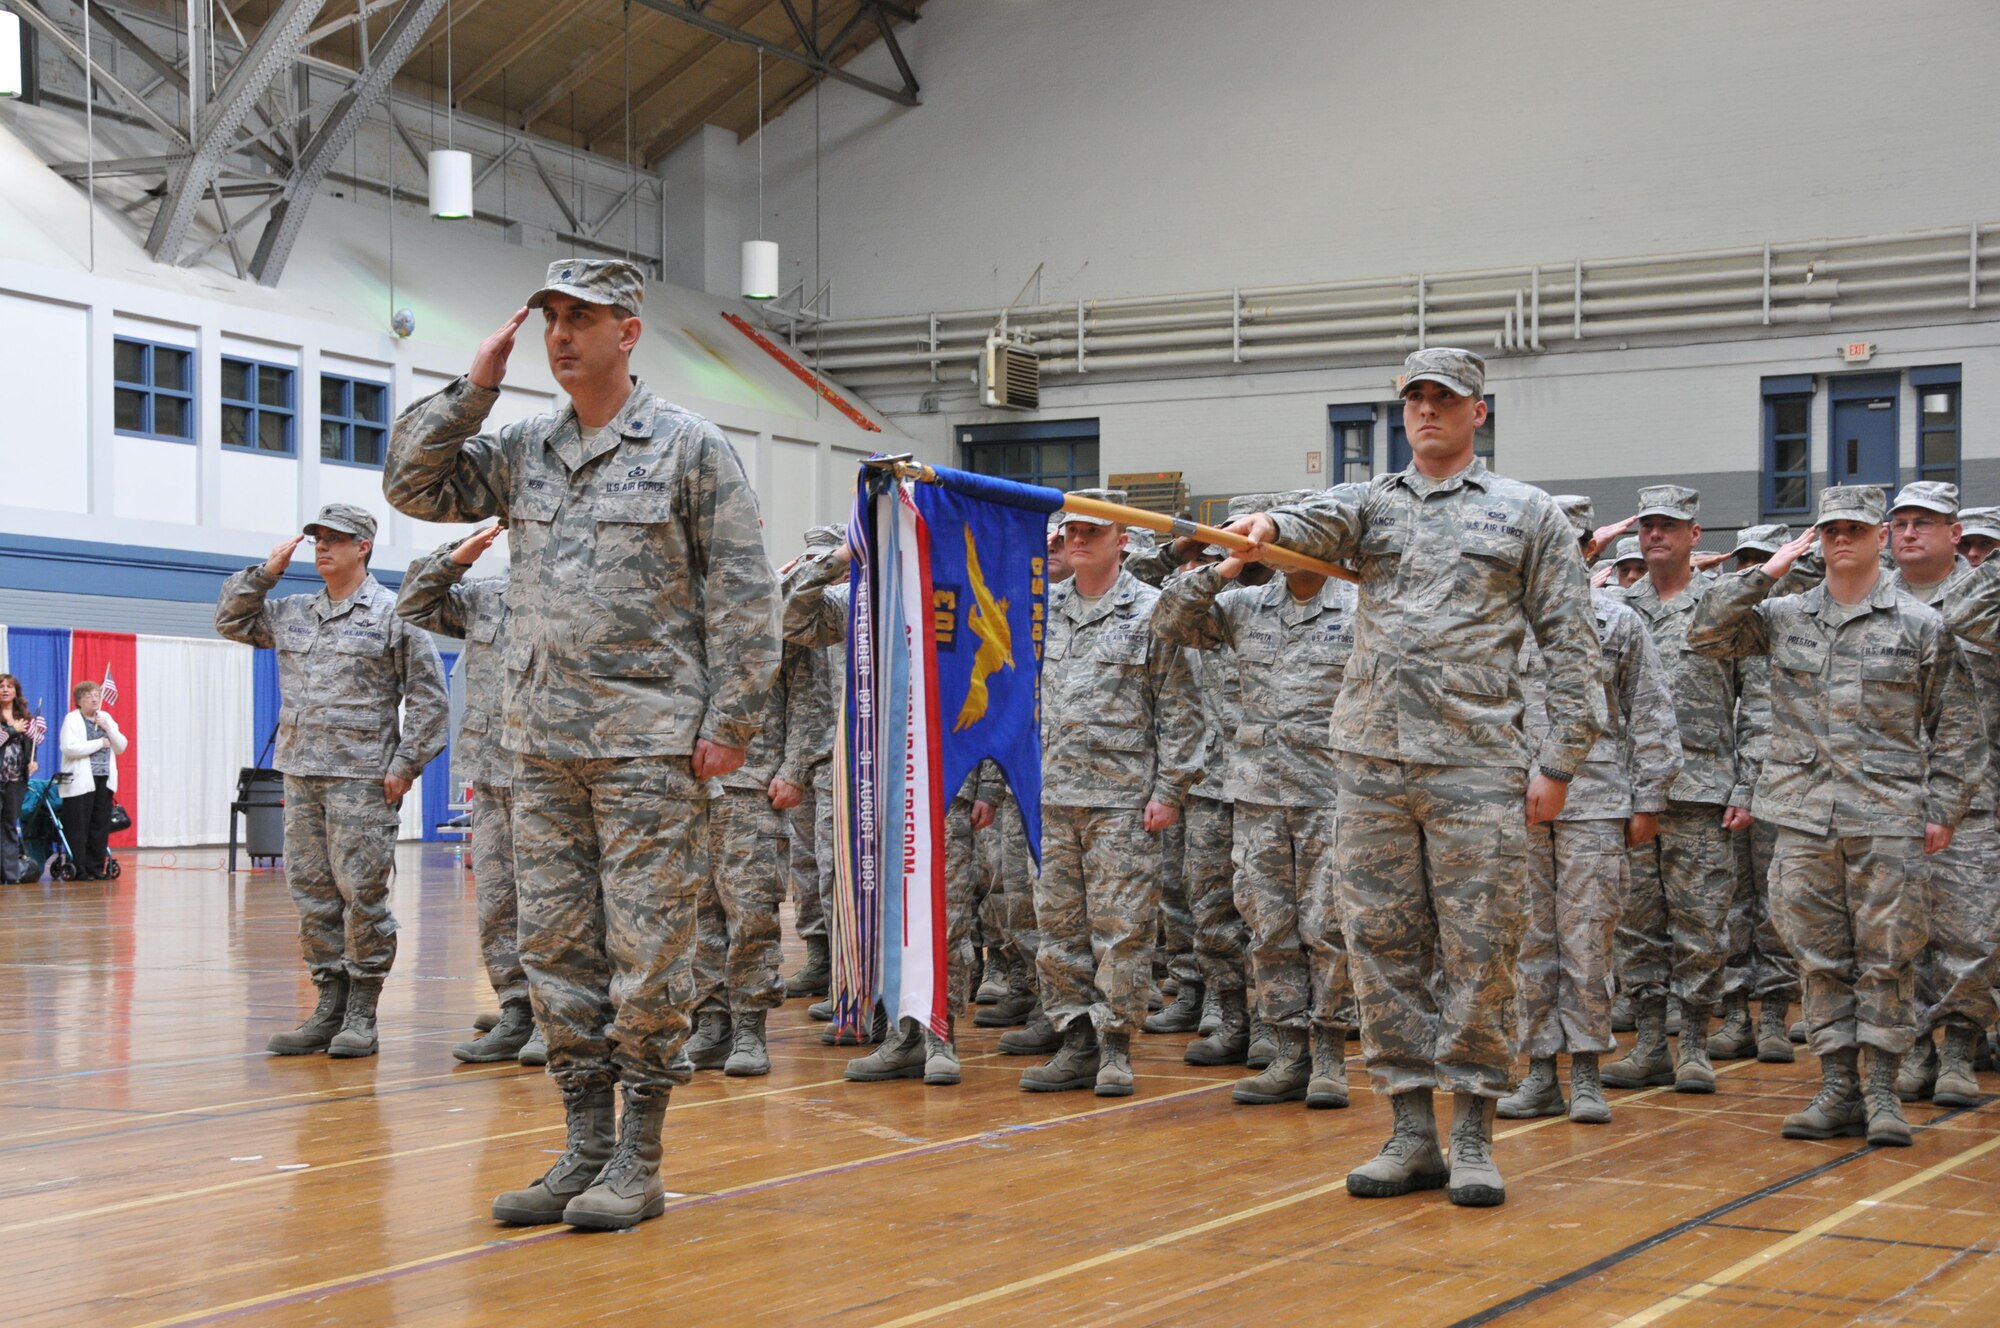 Airmen with the 103rd Air Control Squadron based in Orange, Conn., stand in formation during a formal send-off ceremony held at the William A. O’Neill Armory in Hartford April 25, 2012. The Air National Guard unit has been mobilized and will deploy to Southwest Asia in support of Operation Enduring Freedom. (U.S. Air Force photo by Tech. Sgt. Erin McNamara\RELEASED)